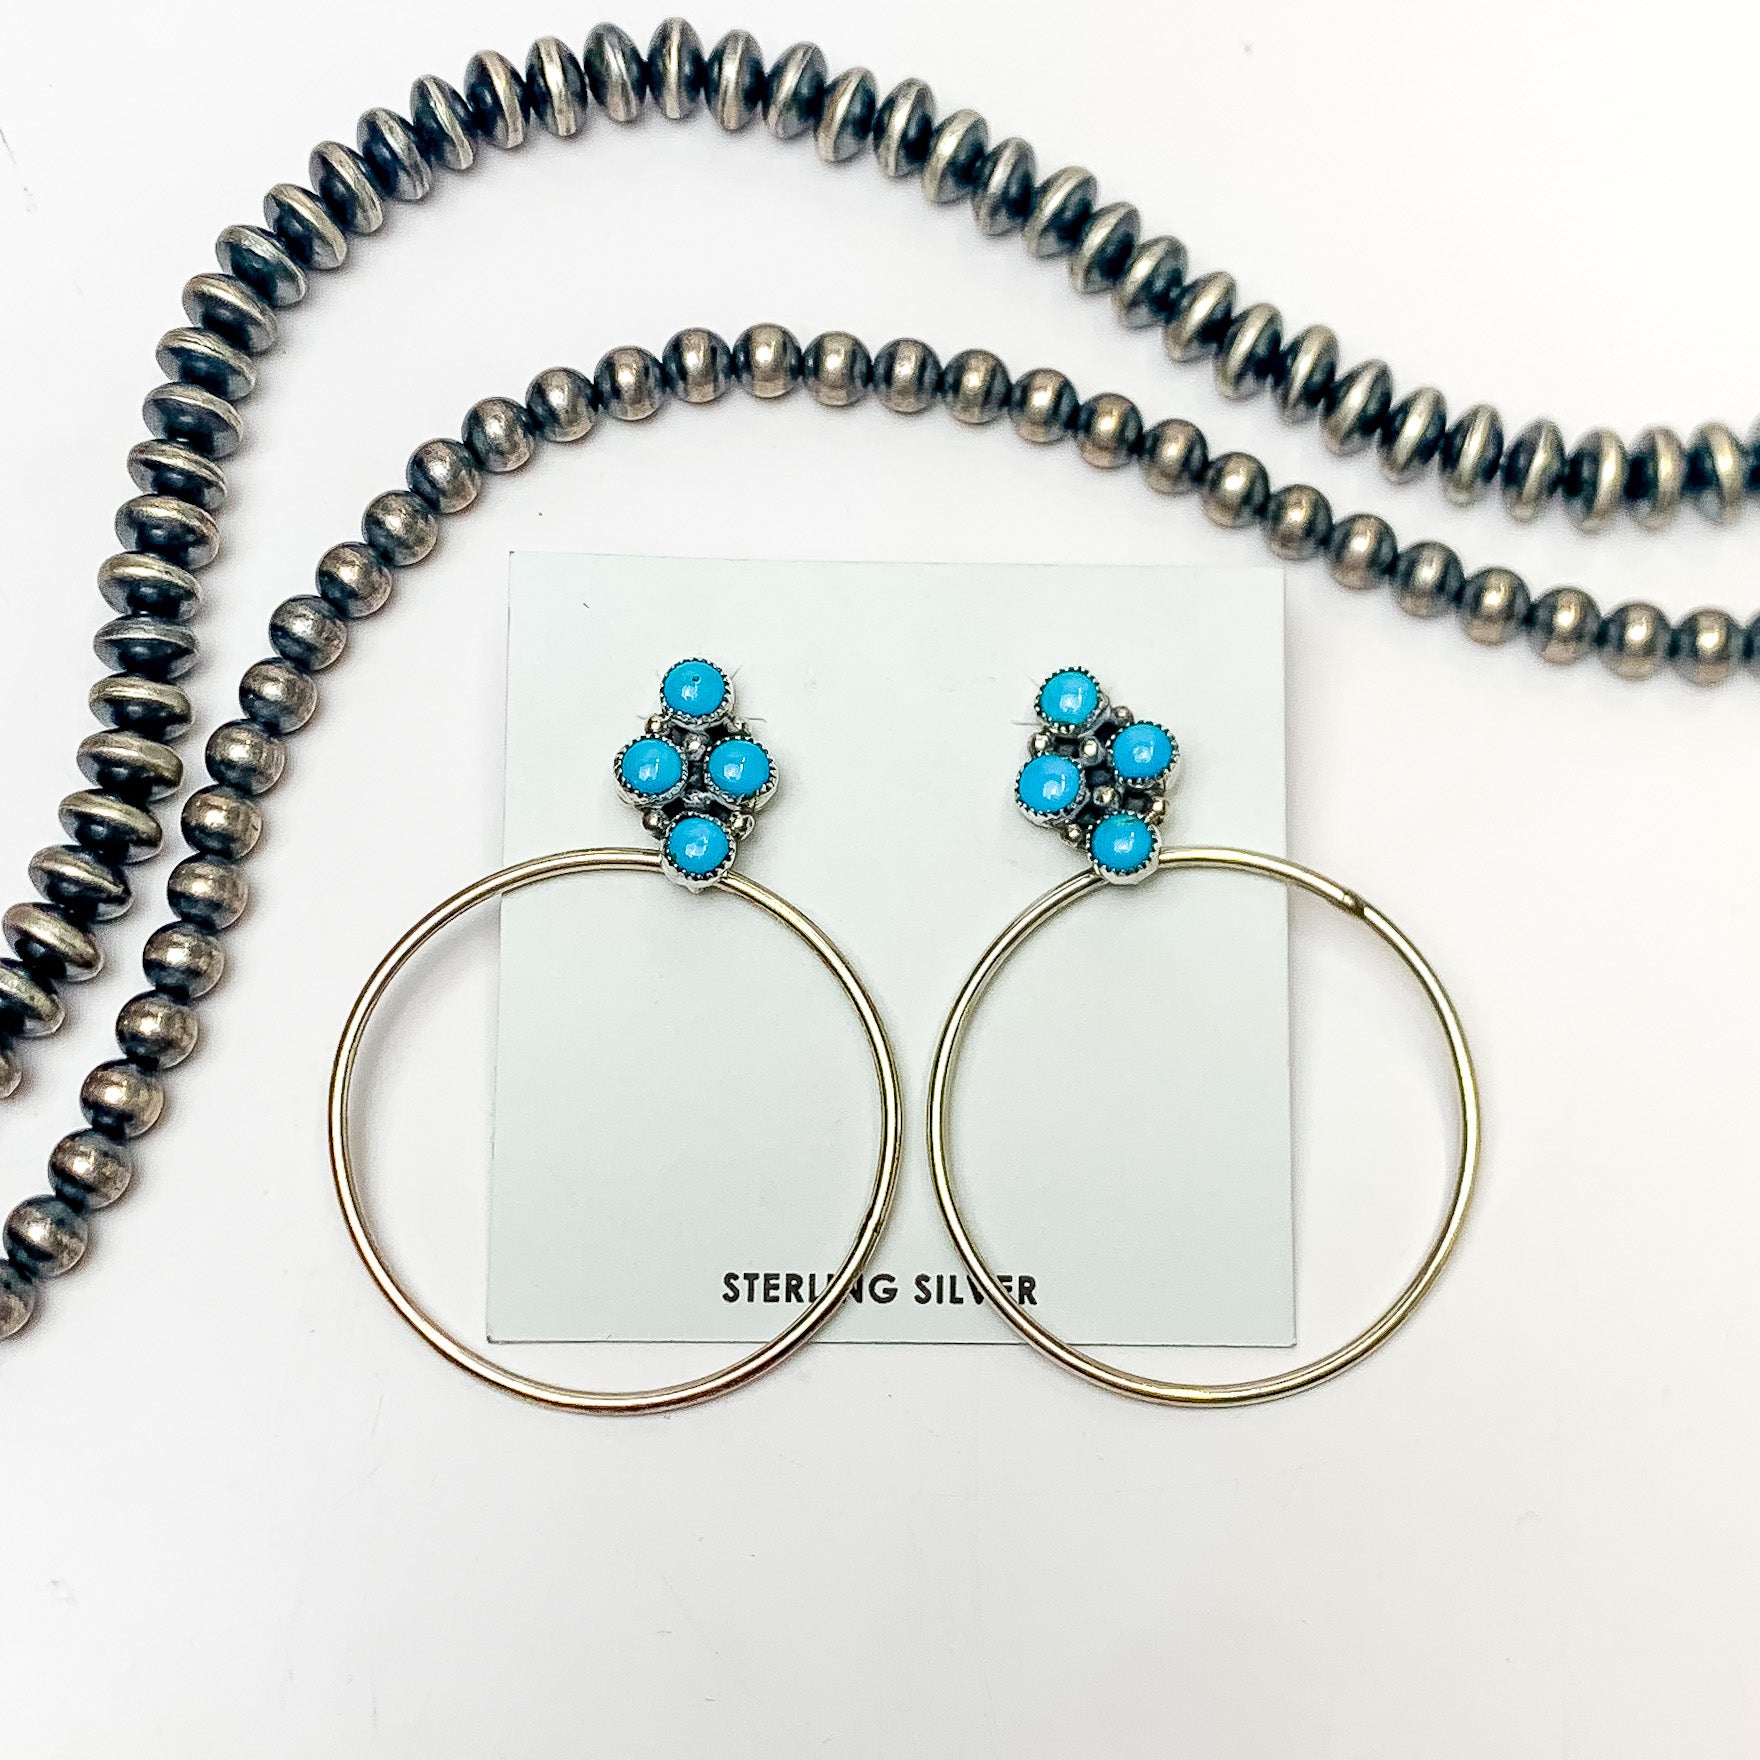 Anthony Skeets | Navajo Handmade Sterling Silver Hoop Earrings with Four Stone Sleeping Beauty Turquoise Cluster Studs - Giddy Up Glamour Boutique